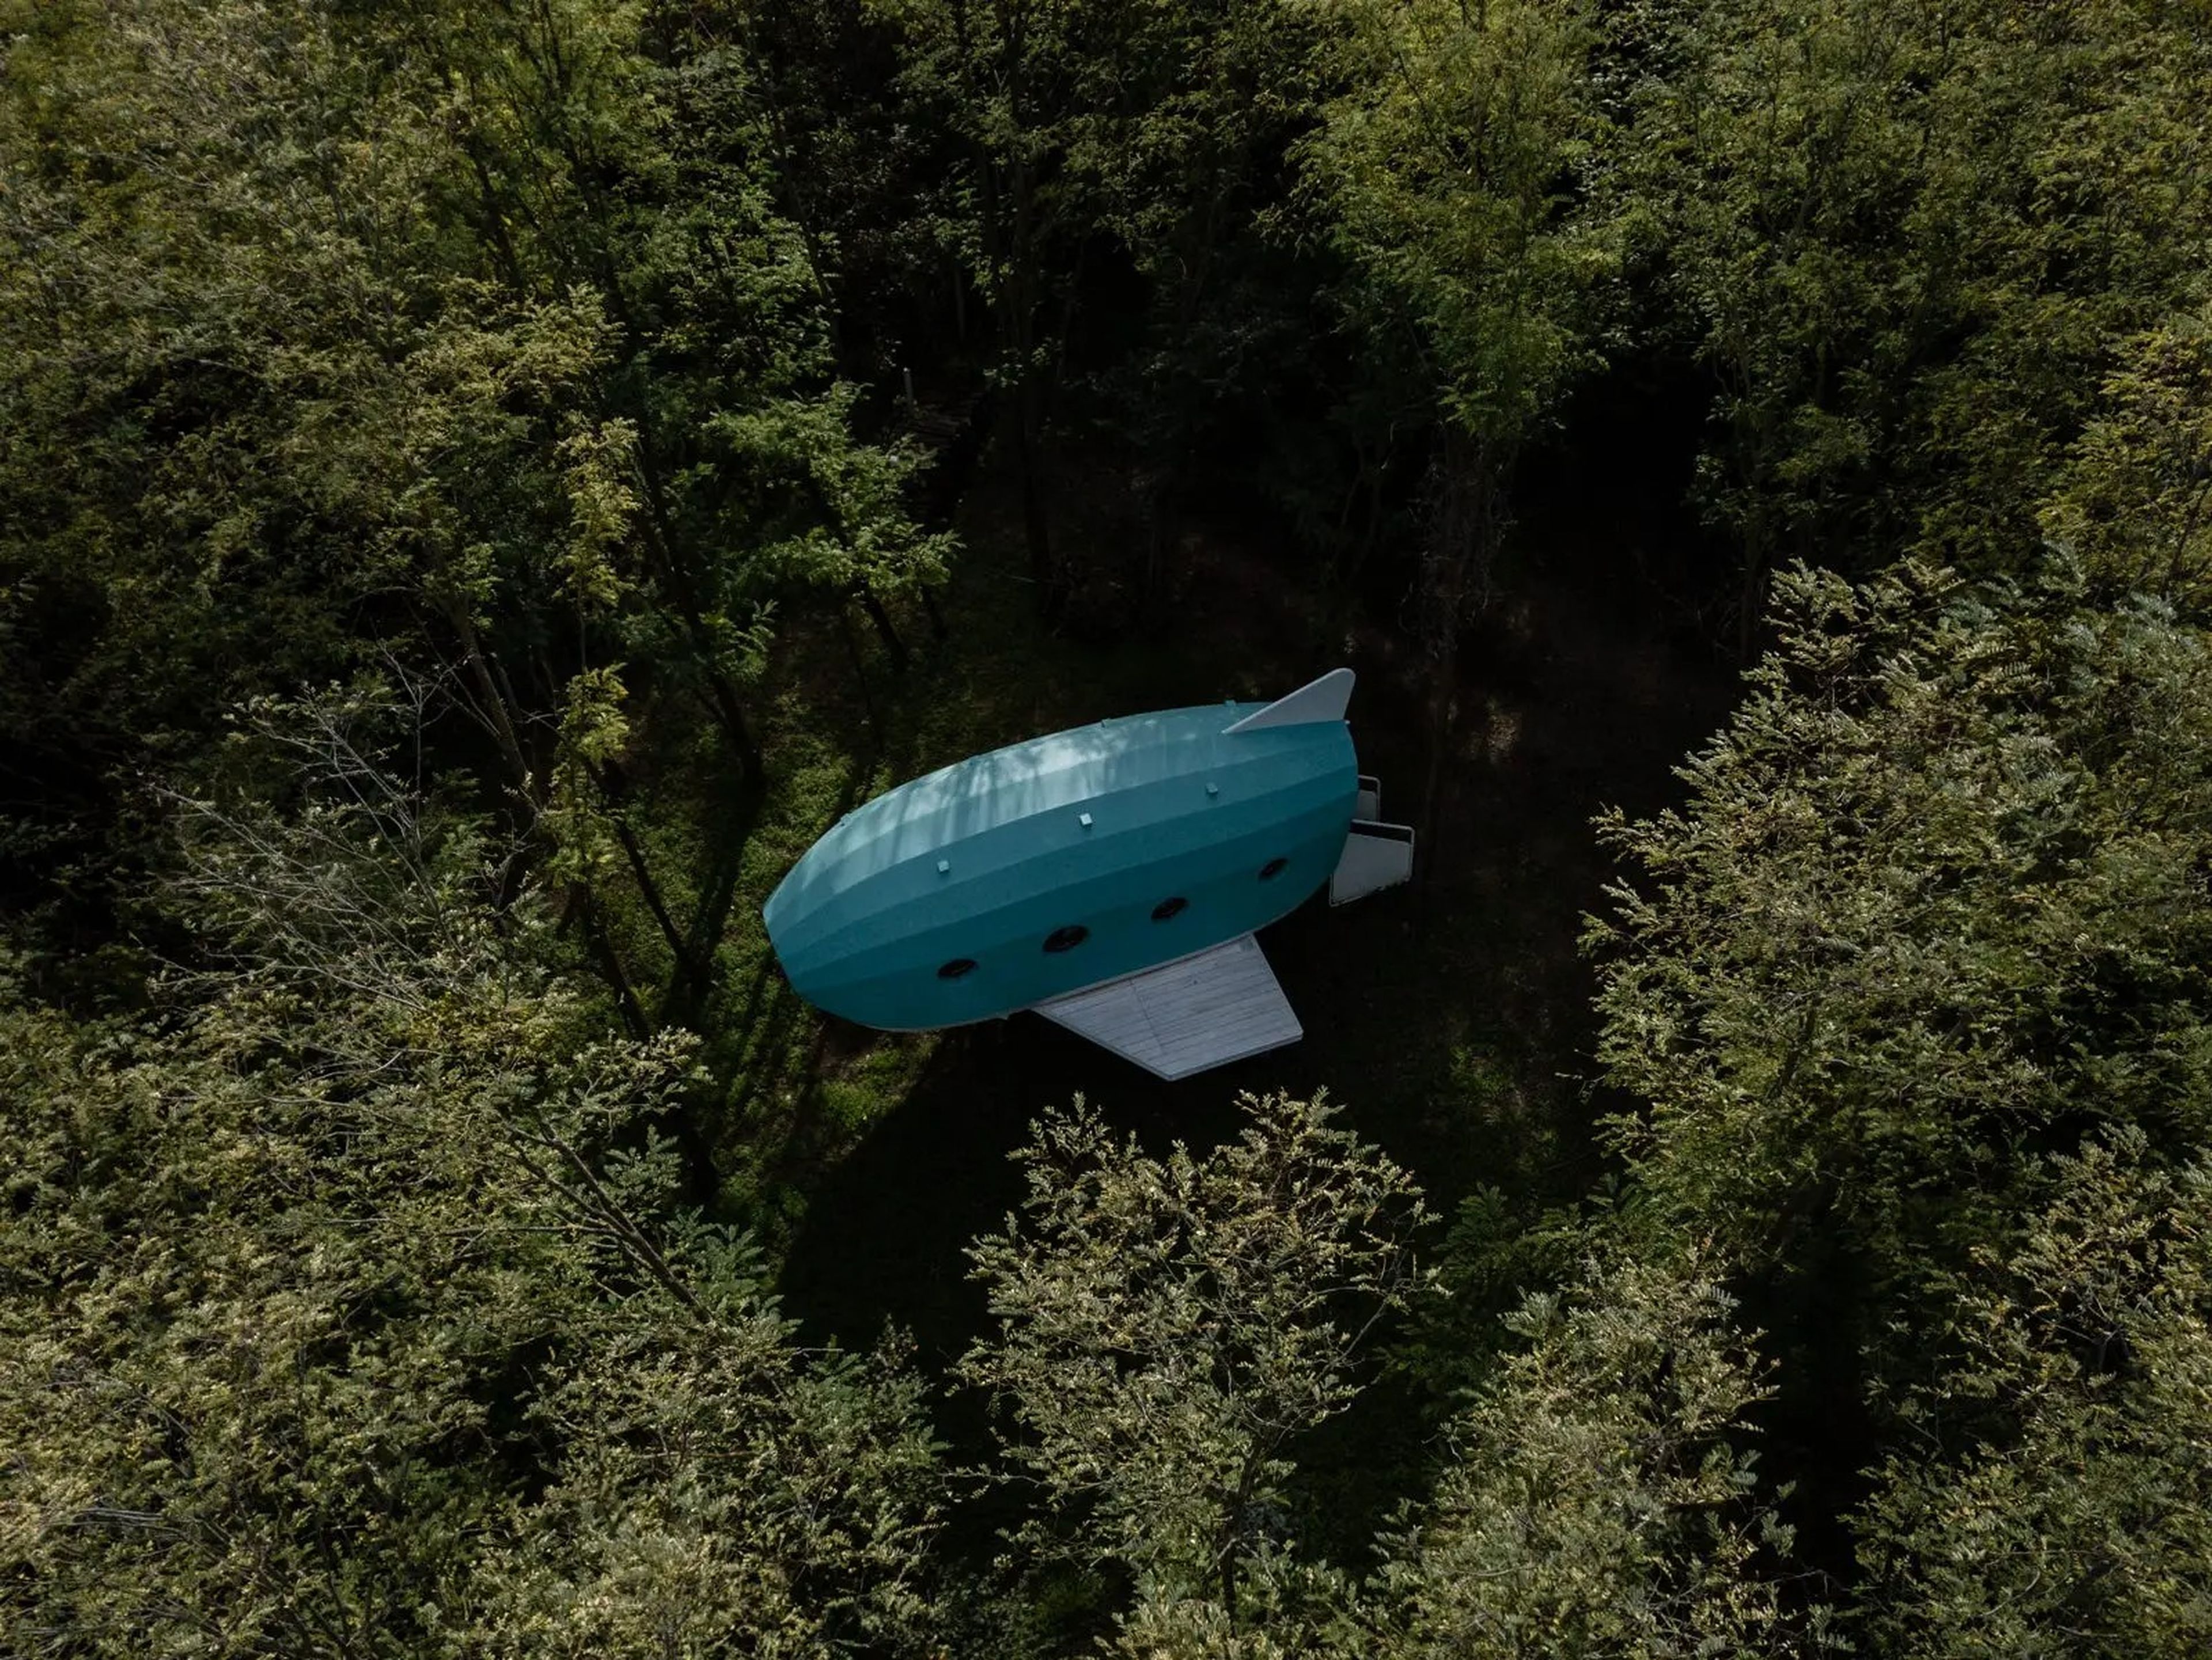 An aerial view of the Jet House, which is situated in a mini-forested area.